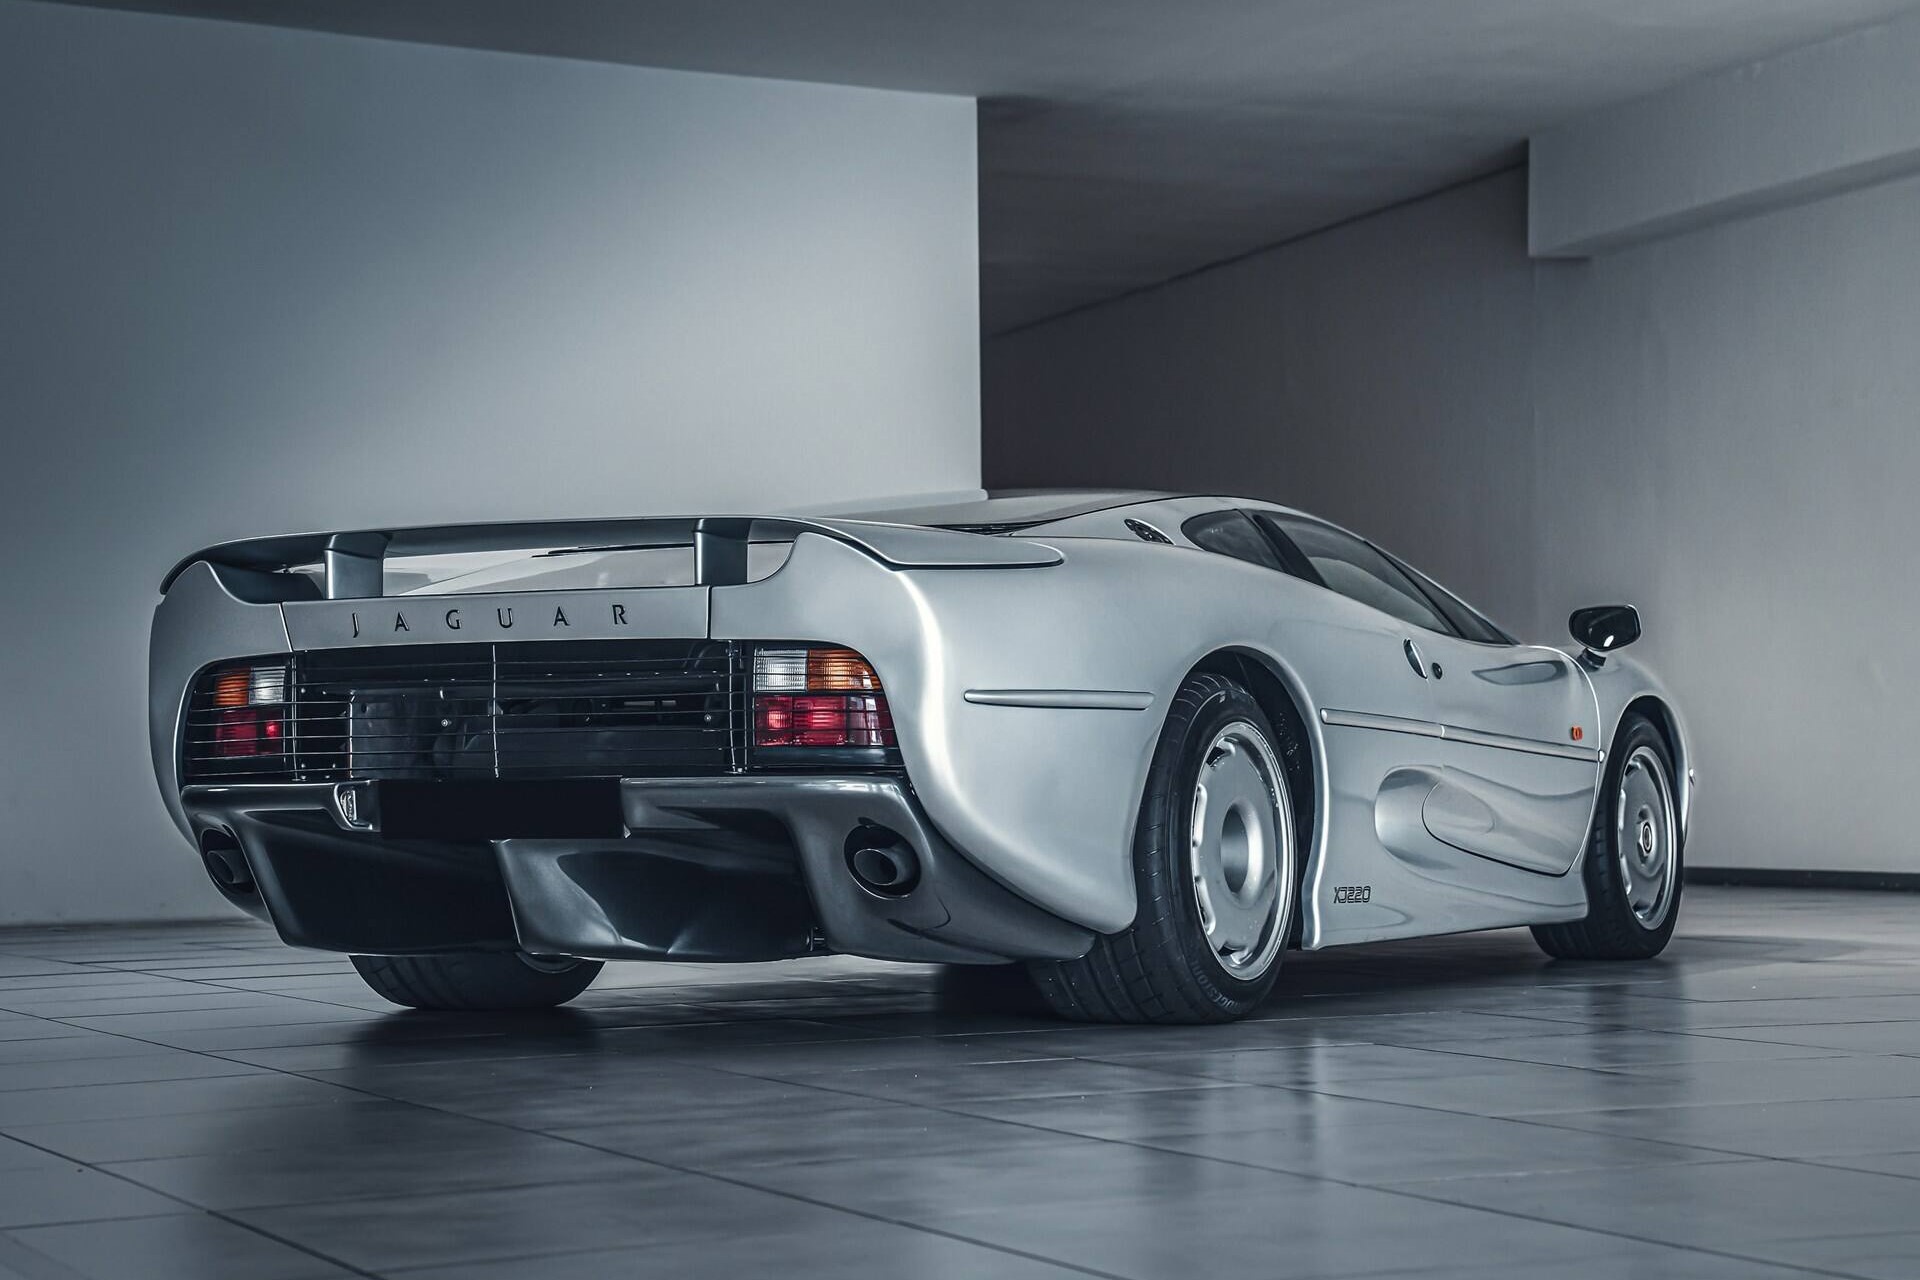 rear angled view of a silver 1993 Jaguar XJ220